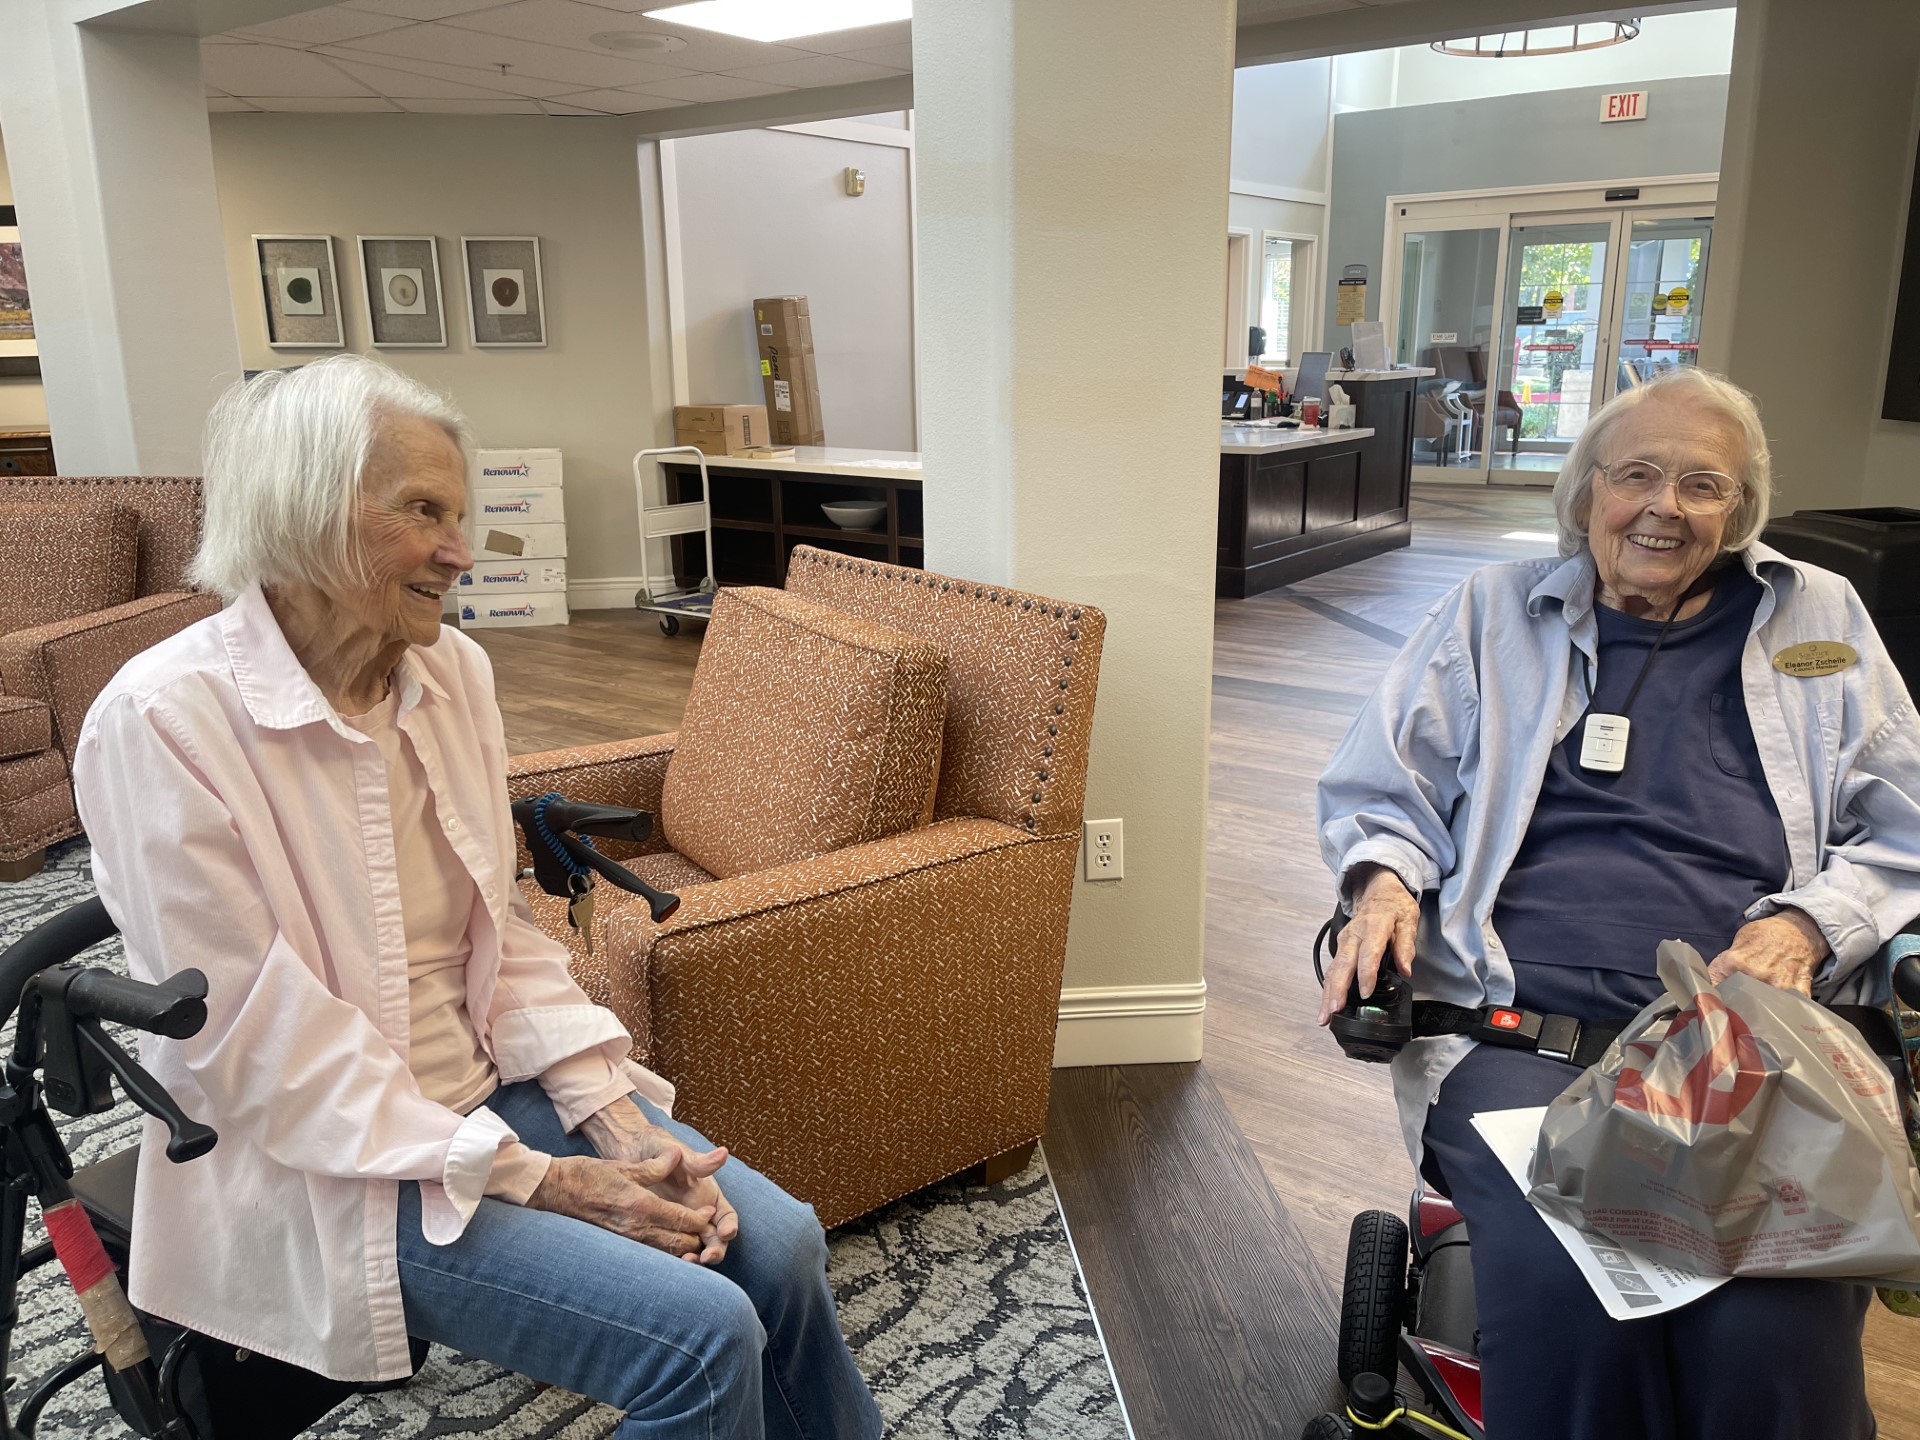 Residents chatting in the lobby Clovis